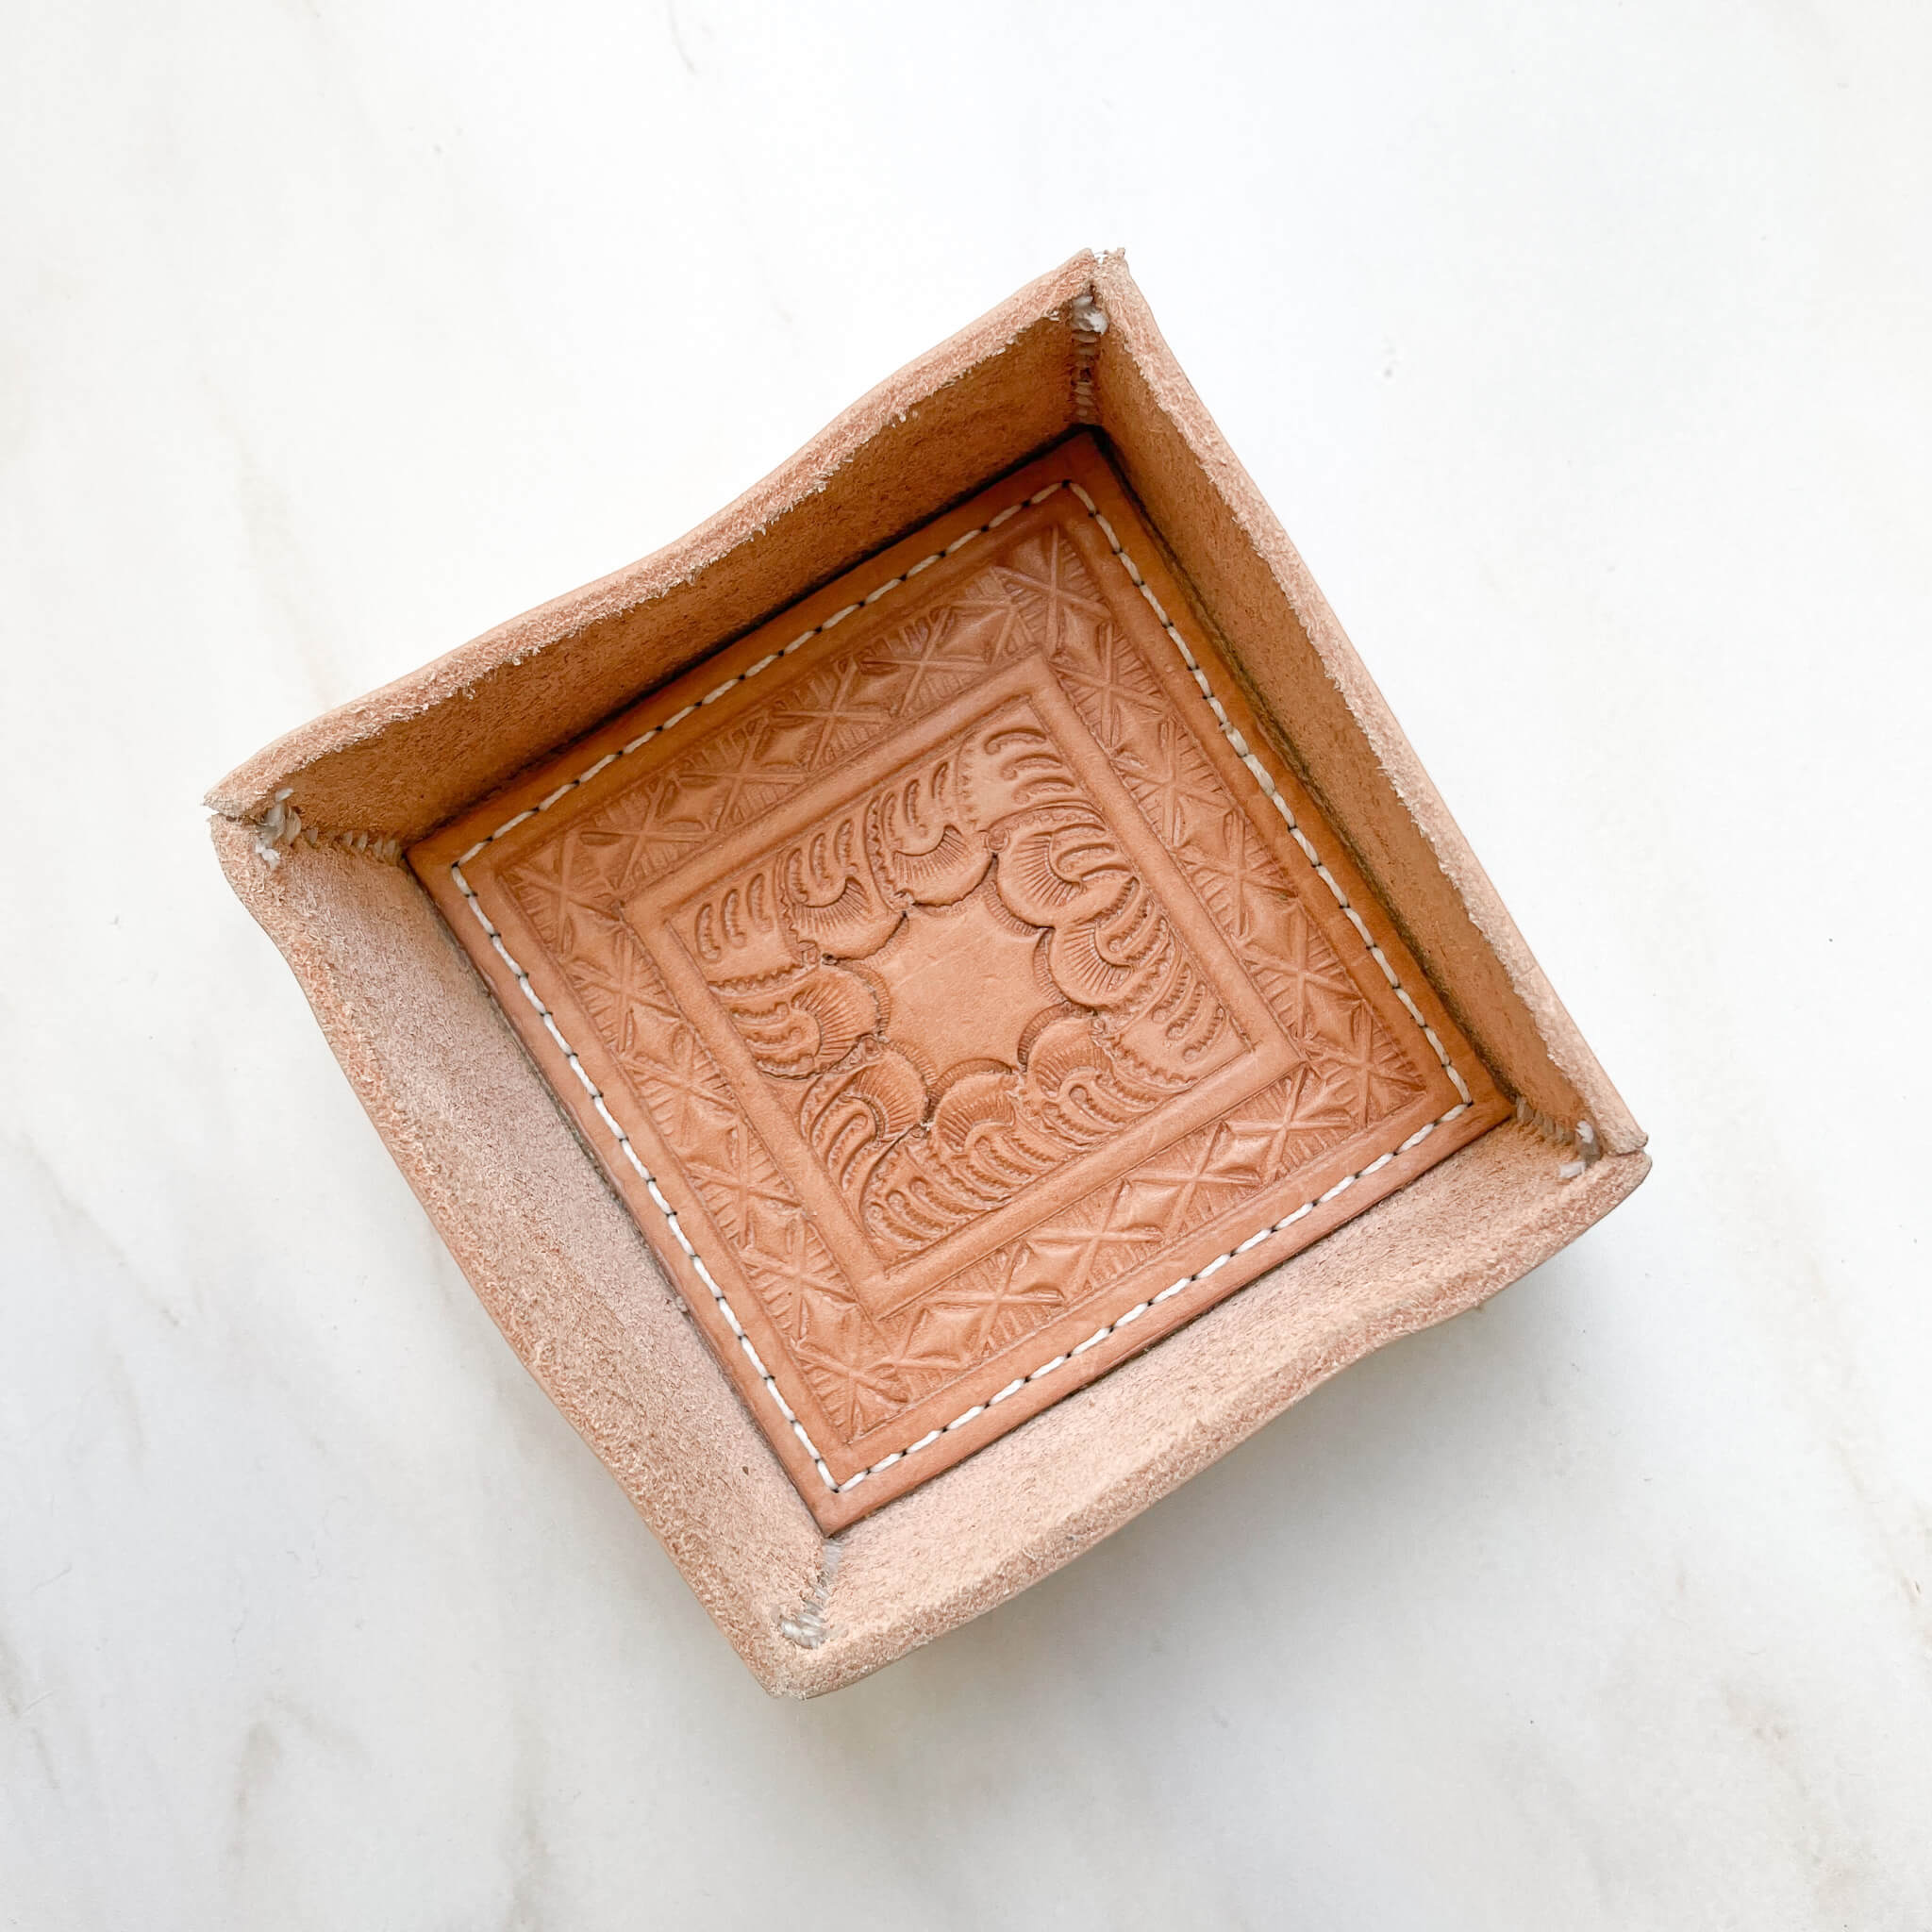 A small hand-tooled Vaquero leather tray.